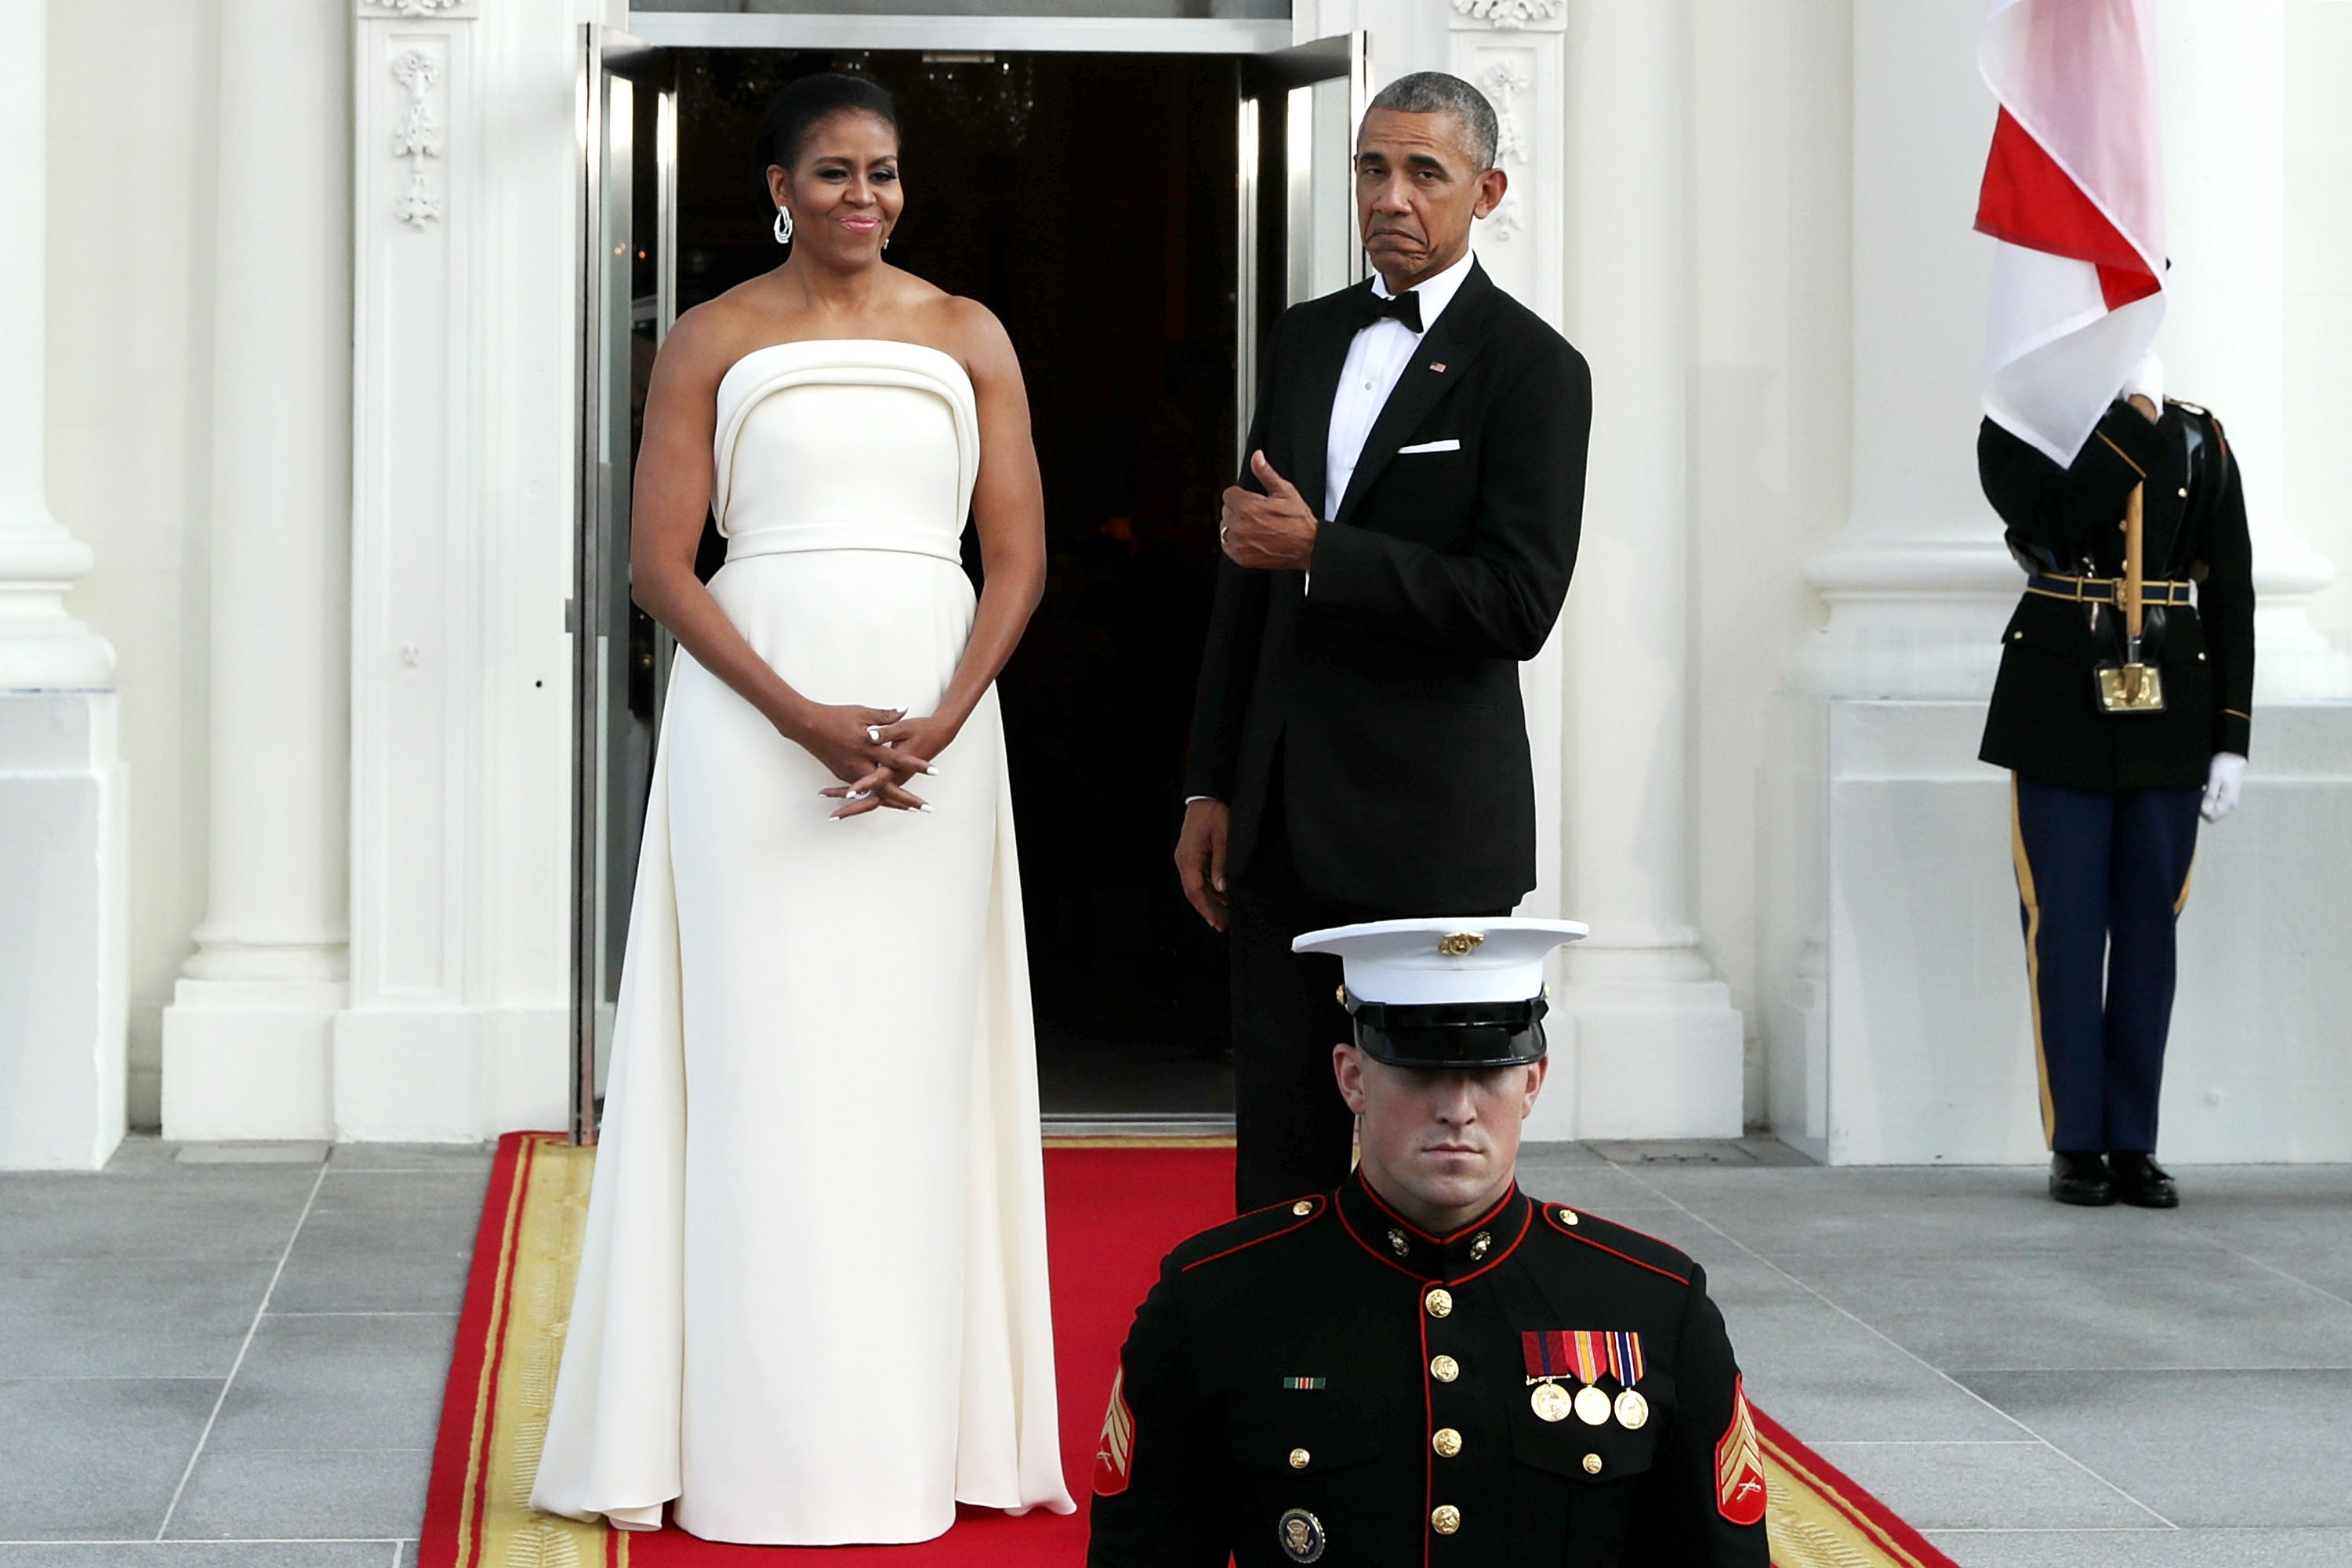 Michelle Obama, Zendaya and Chanel Iman's Style Take the Cake This Week
